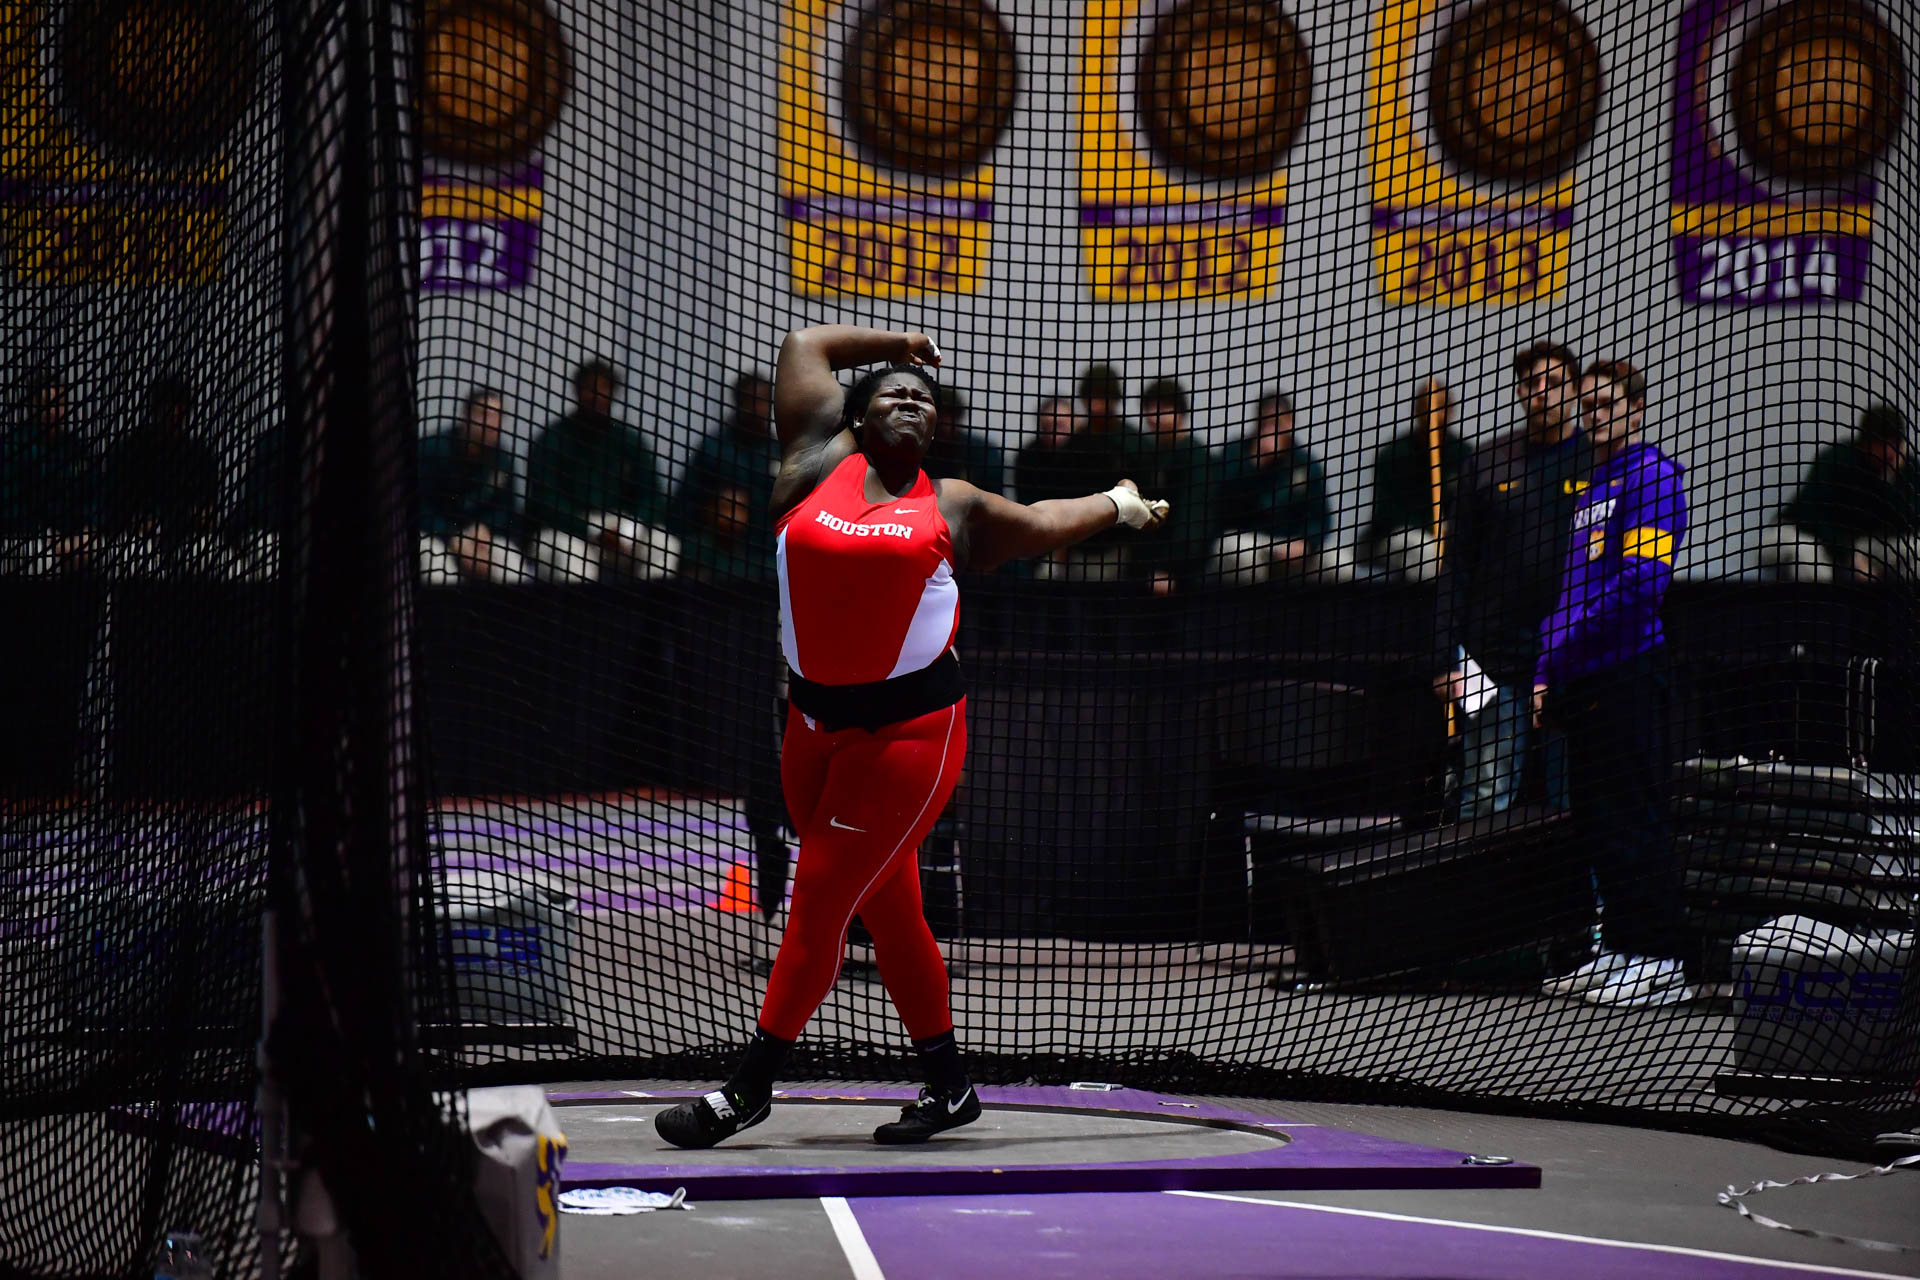 Senior Tailor Scaife has had four first-place finishes in her last five events. | Lino Sandil/The Cougar